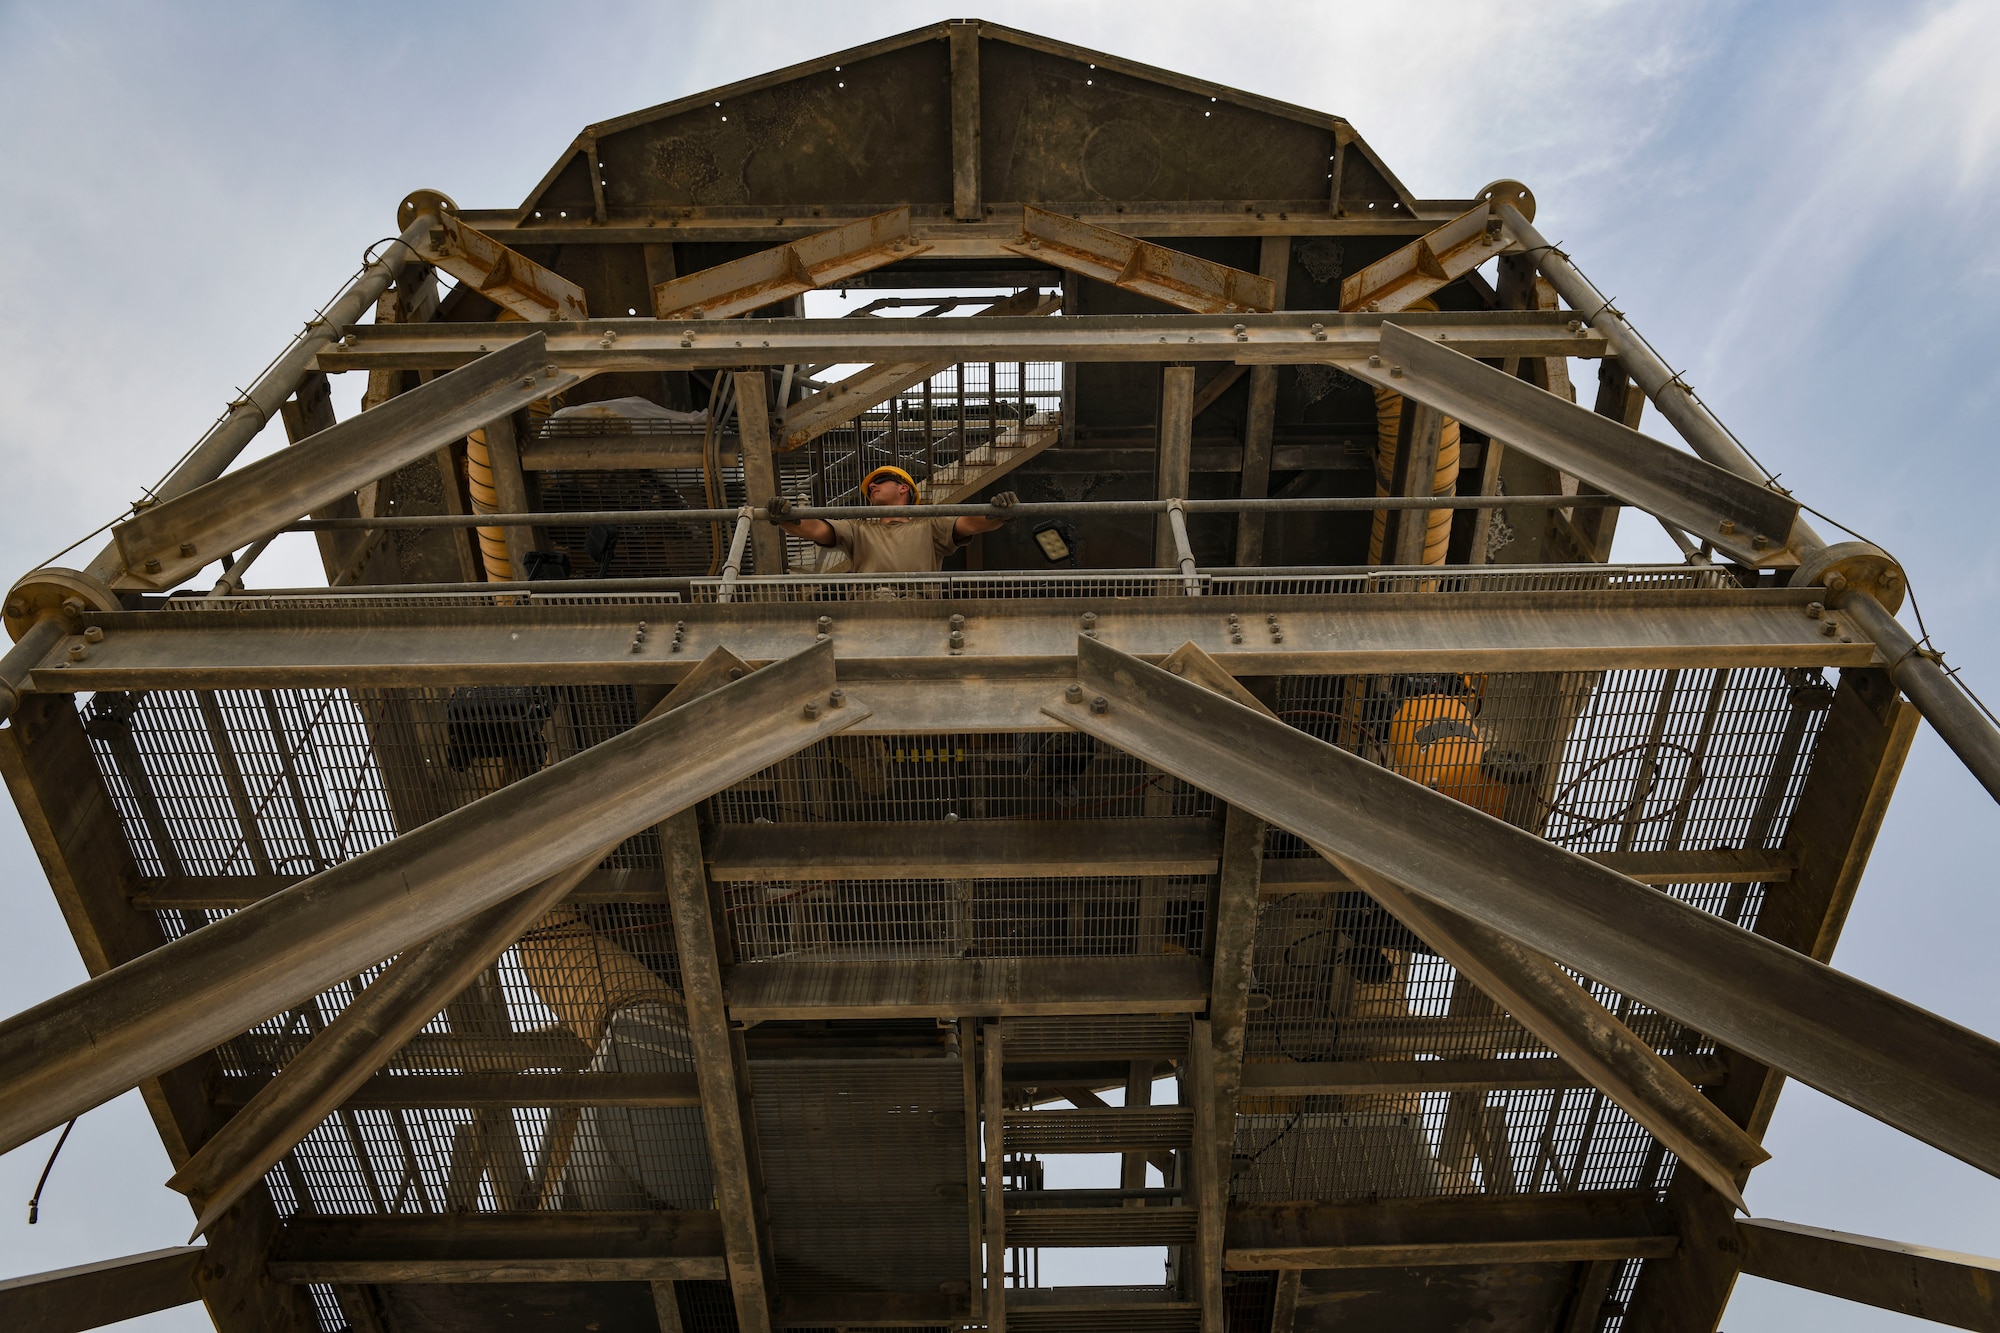 A U.S. Air Force Airman from the 727th Expeditionary Air Control Squadron, Detachment 3, overlooks the removal of a radome and replacement of an AN/TPS-75 radar system as part of regular maintenance July 27, 2021, at Al Udeid Air Base, Qatar. The radar provides a common surveillance and combat identification picture to support battle management command and control for the combined defense of the Arabian Peninsula. (U.S. Air Force by Staff Sgt. Alexandria Lee)